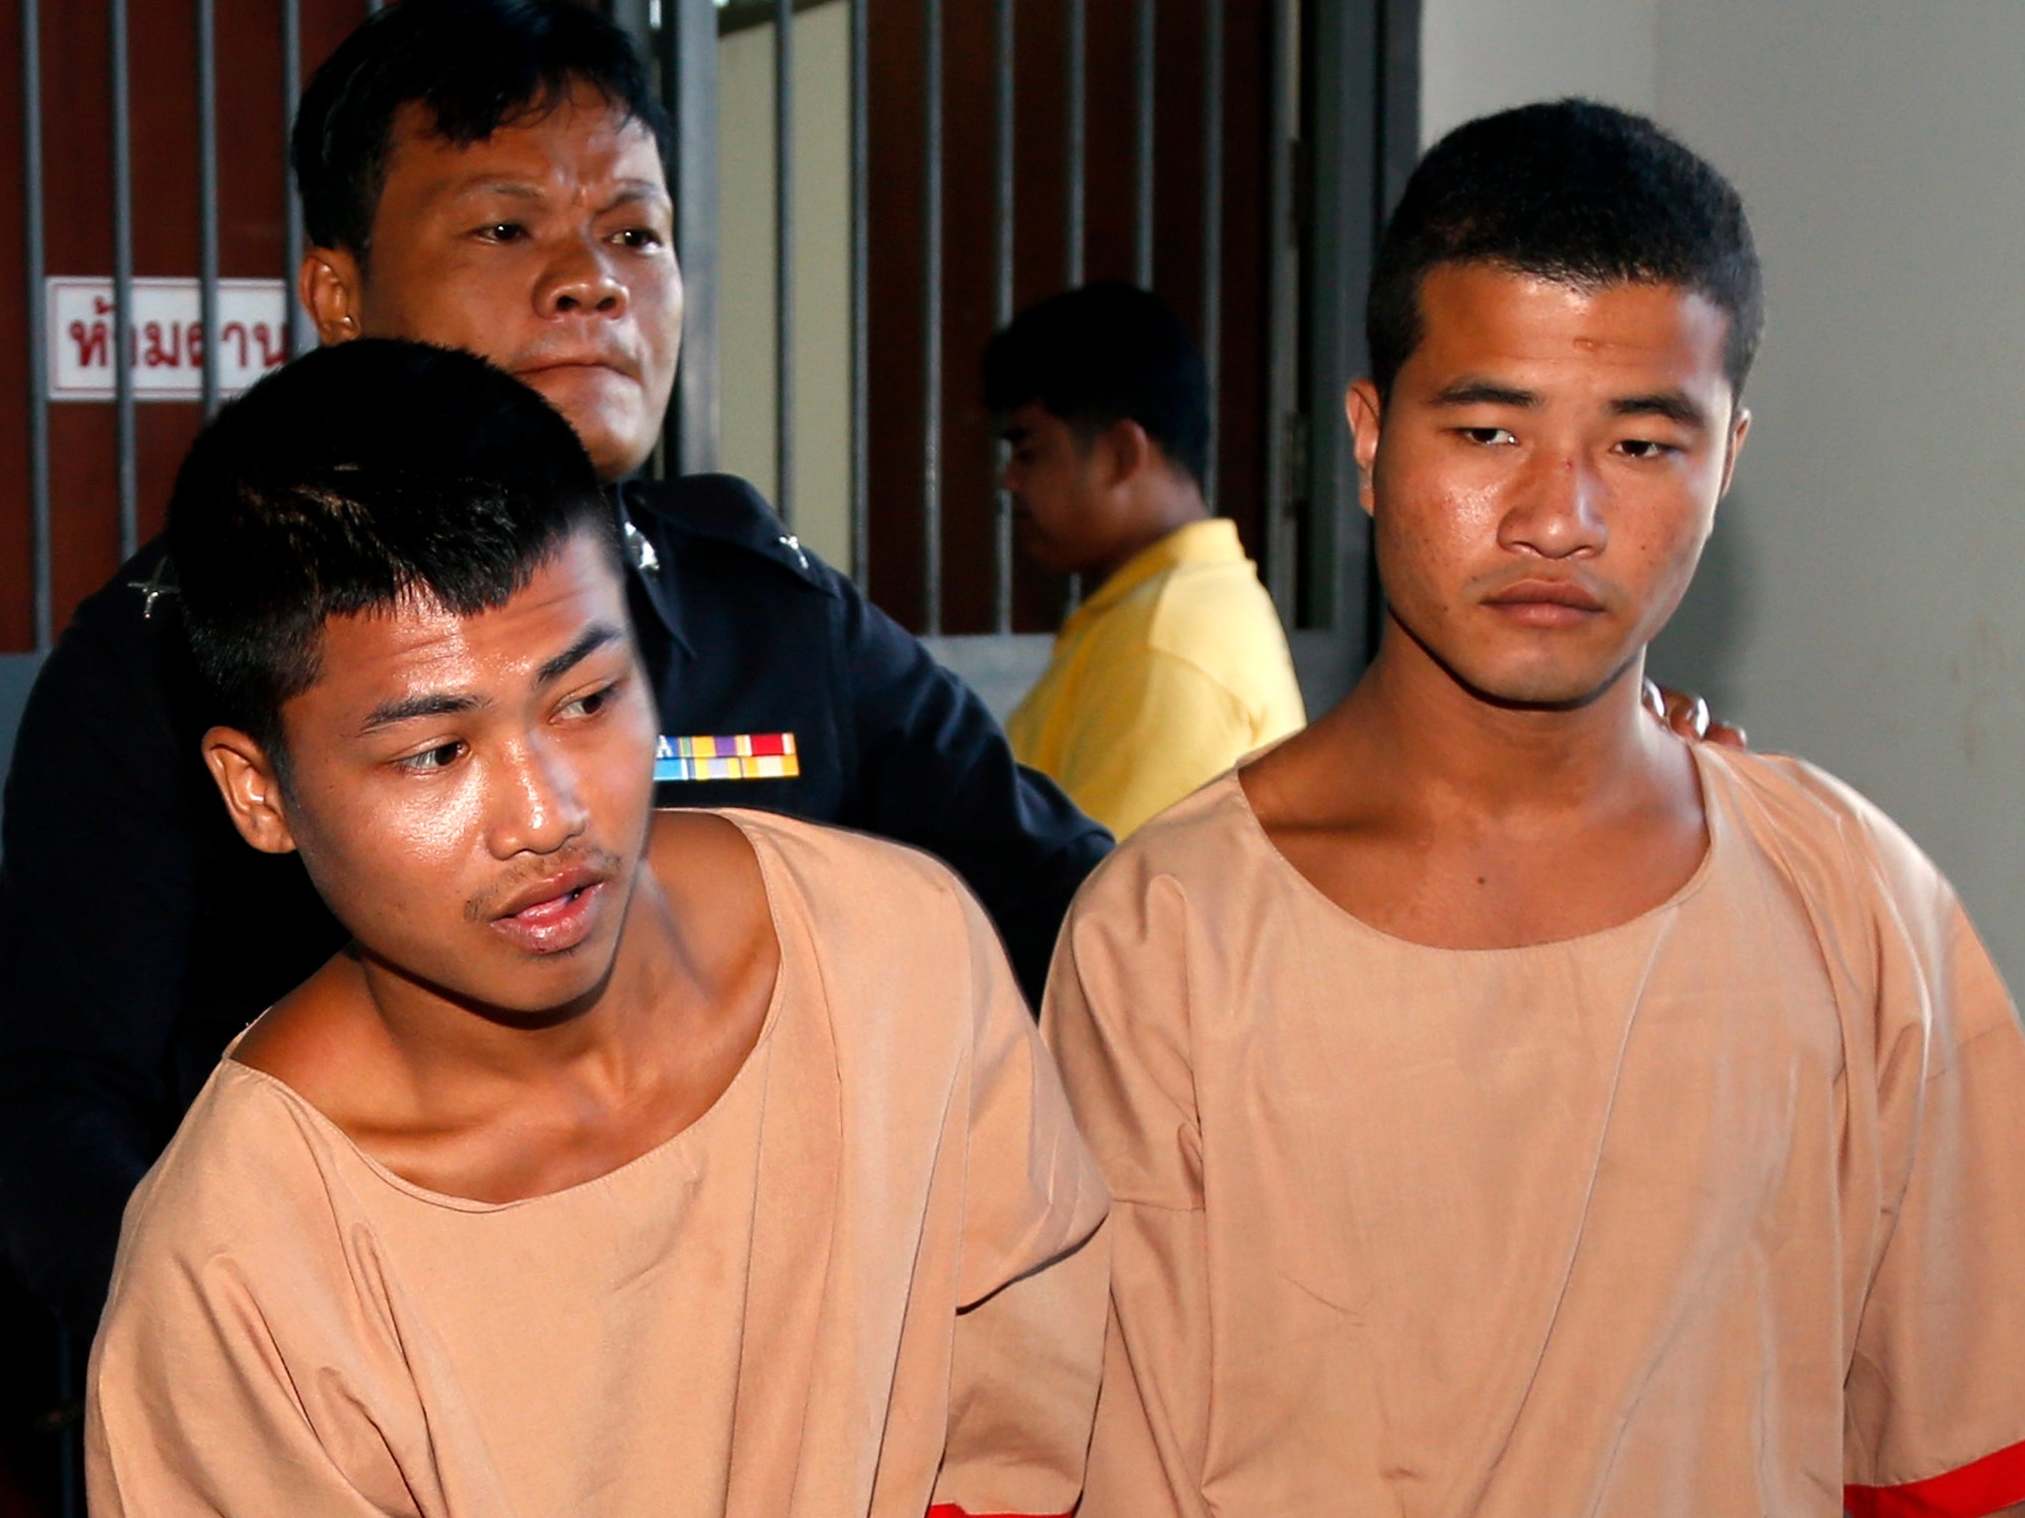 Zaw Lin and Wai Phyo were convicted over the killings of two British tourists but the pair have denied their involvement in the murders